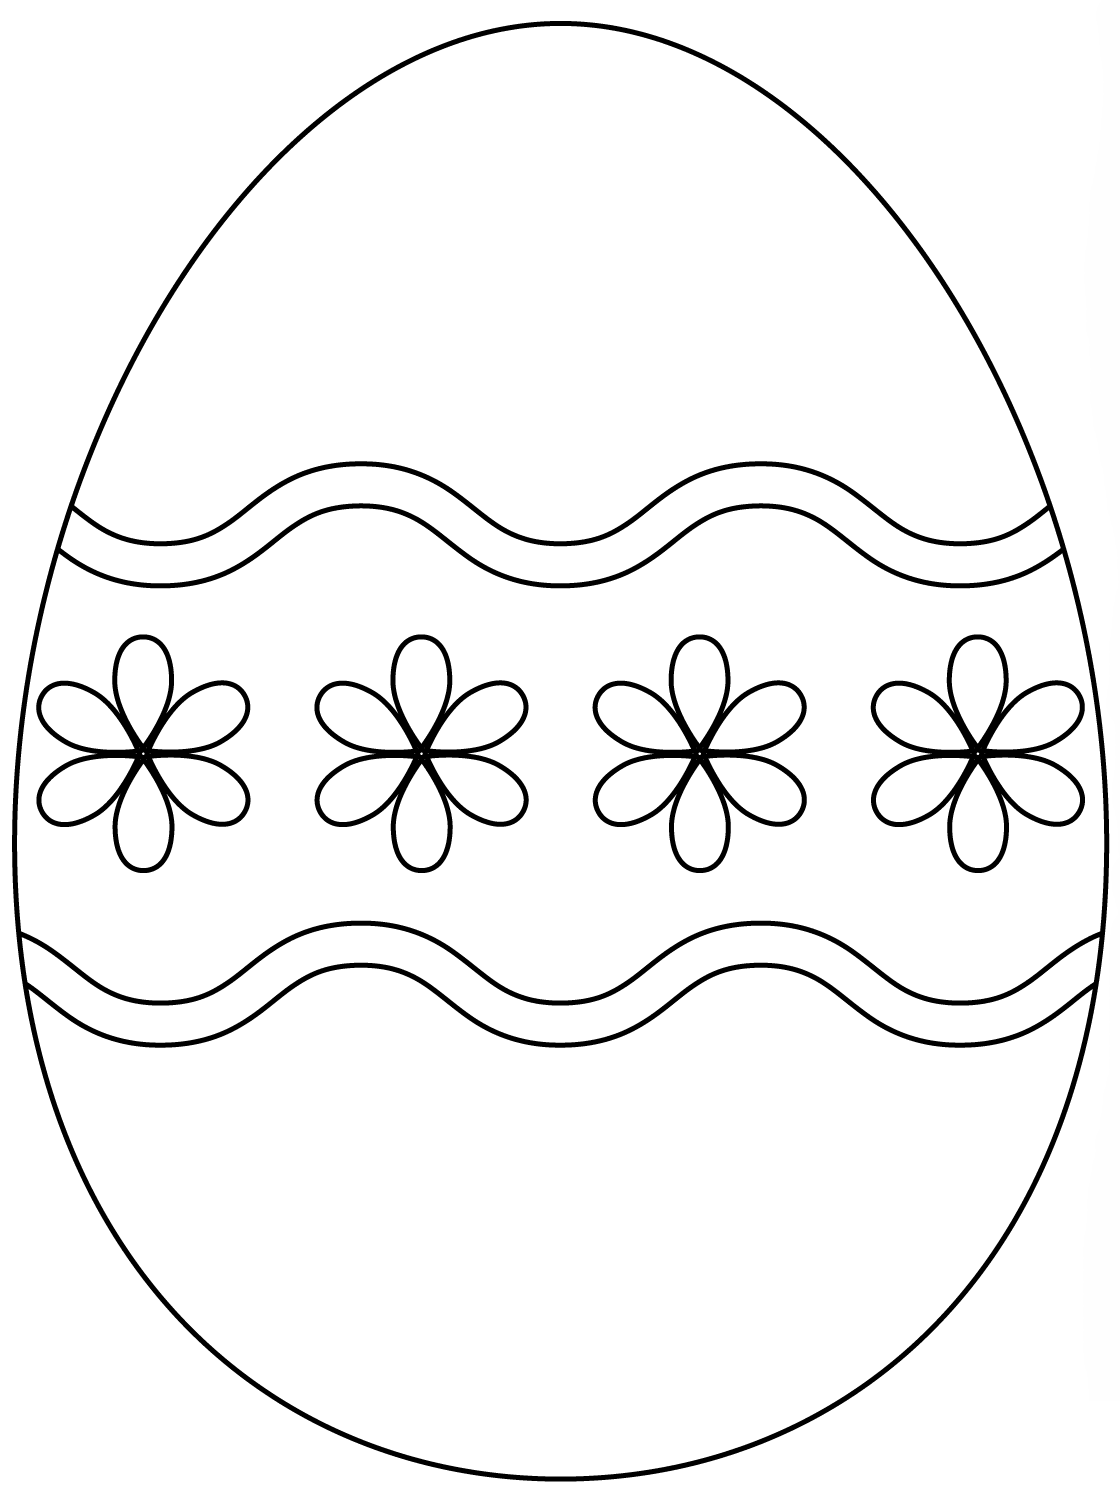 Easter Egg With Simple Flower Pattern Coloring Page